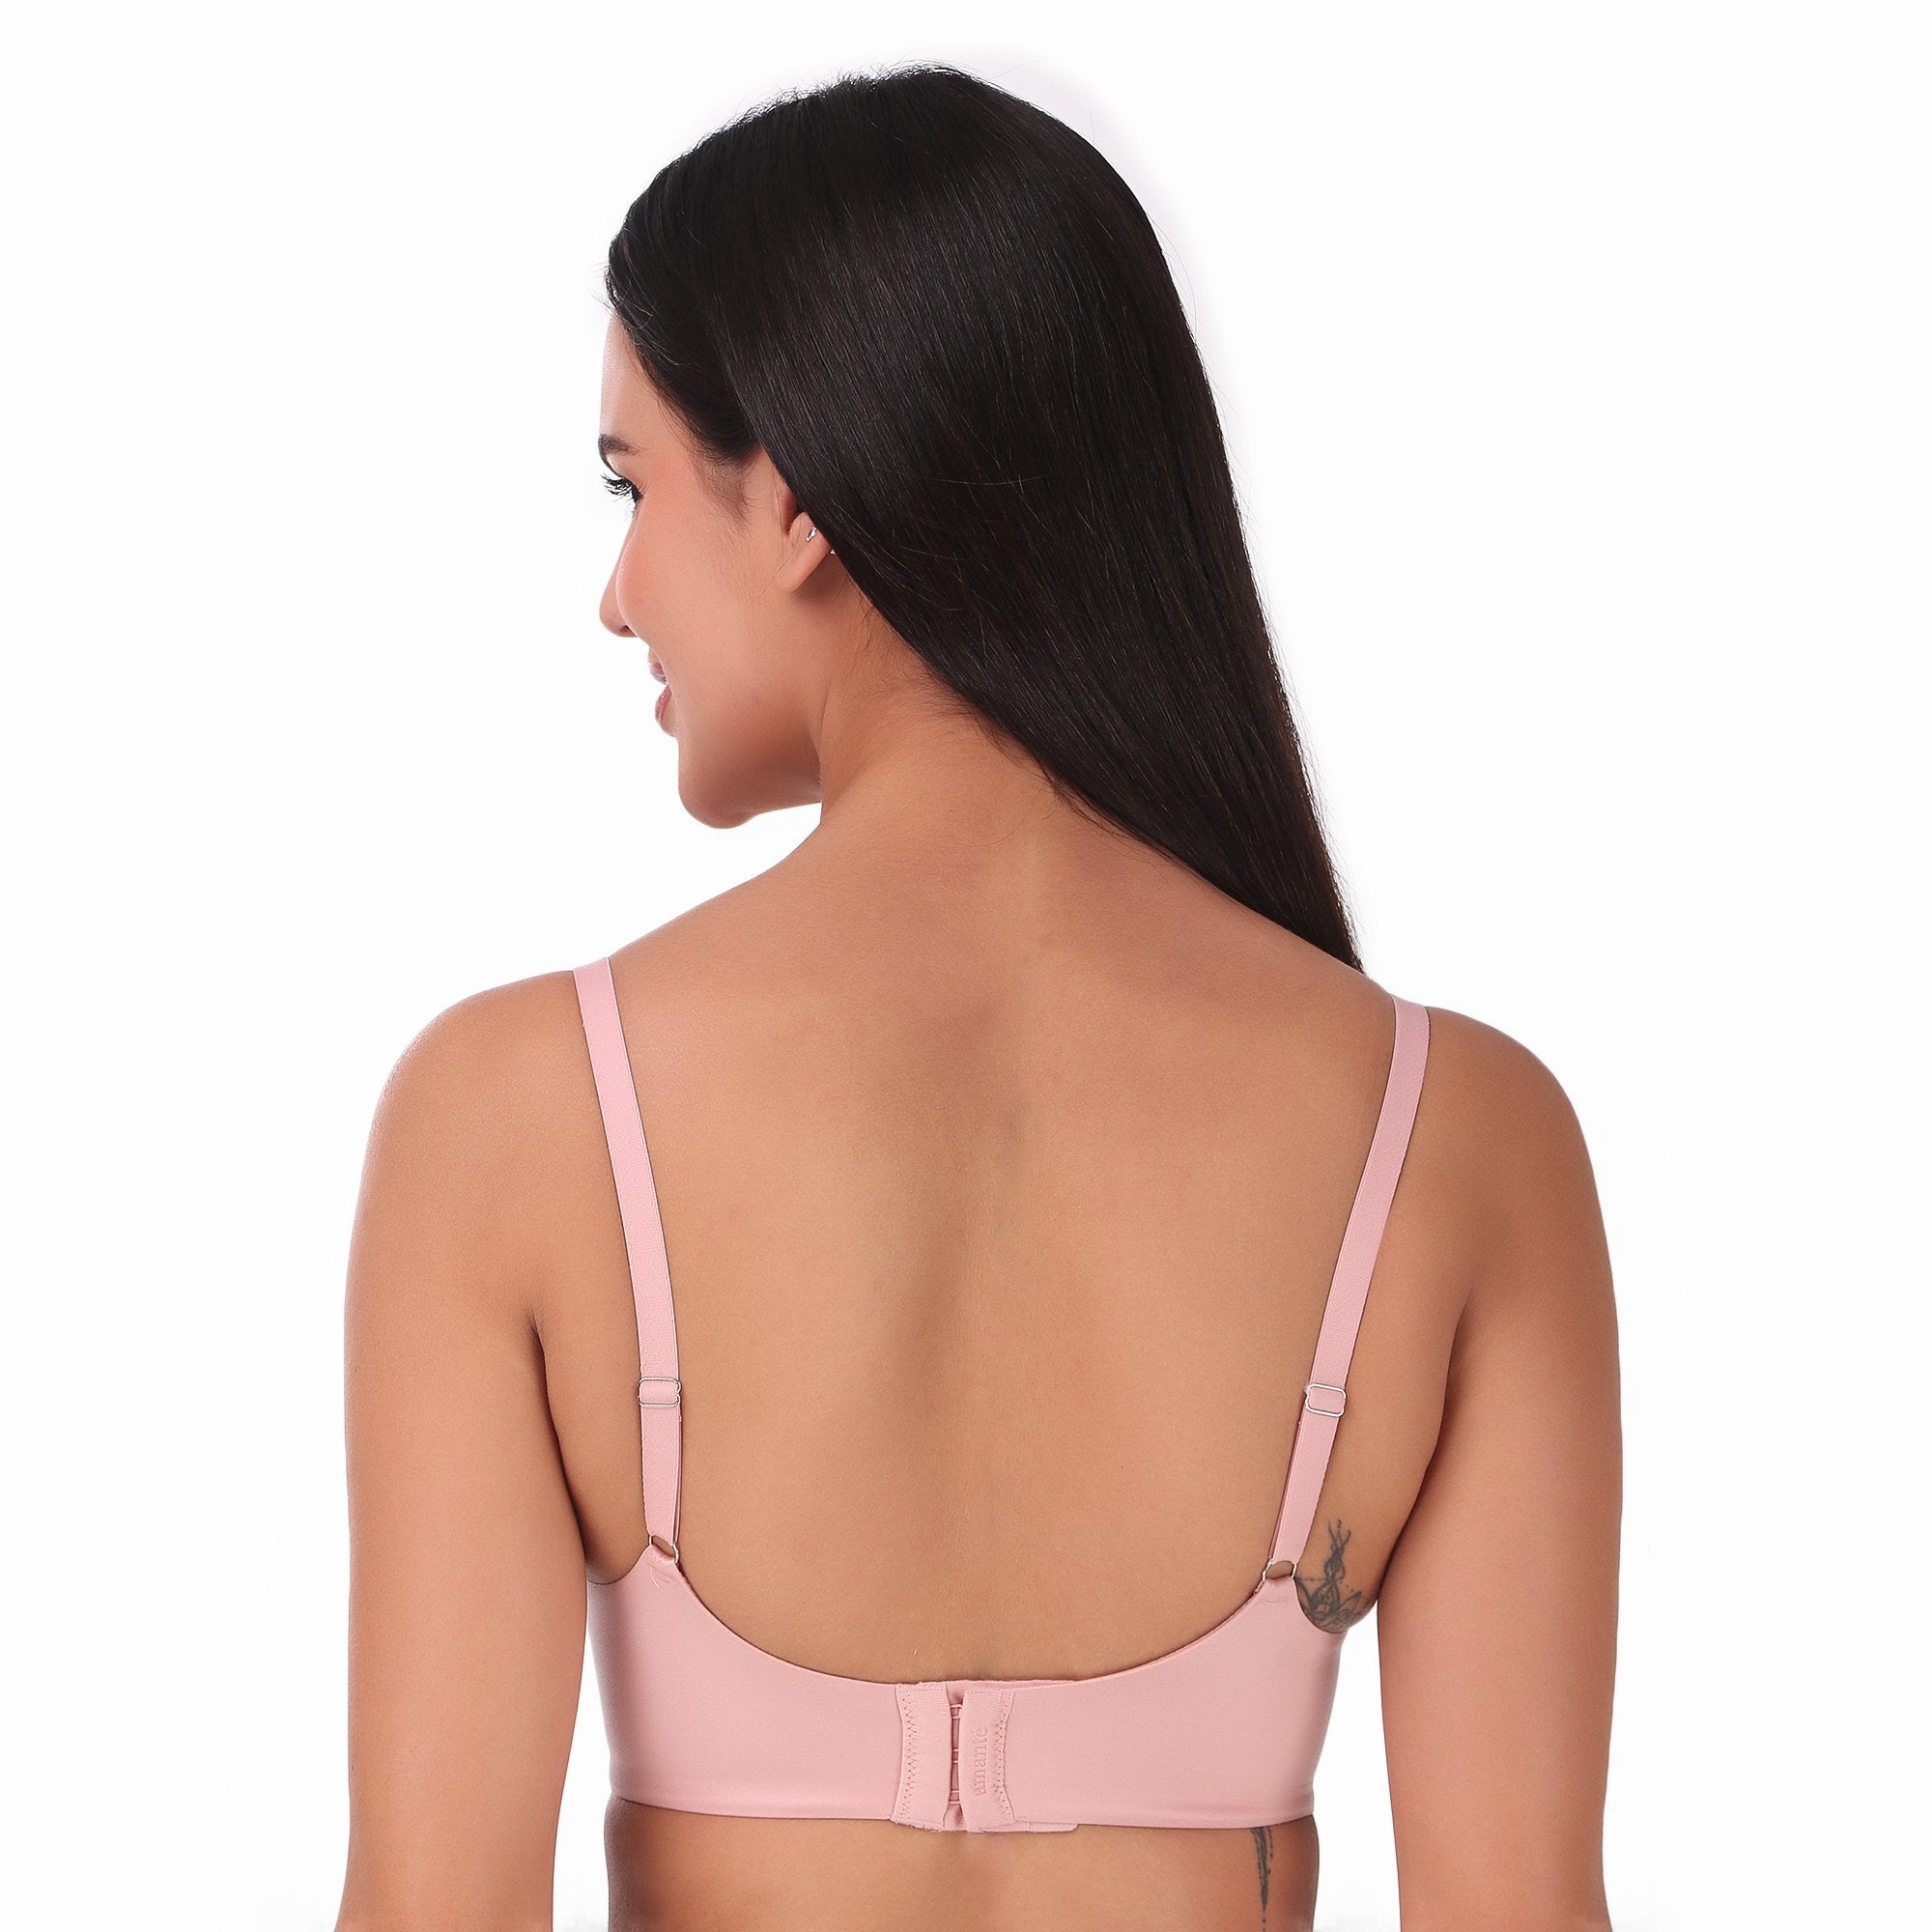 AMANTE-BRA77401 Cloud soft Padded & Non-wired Bra